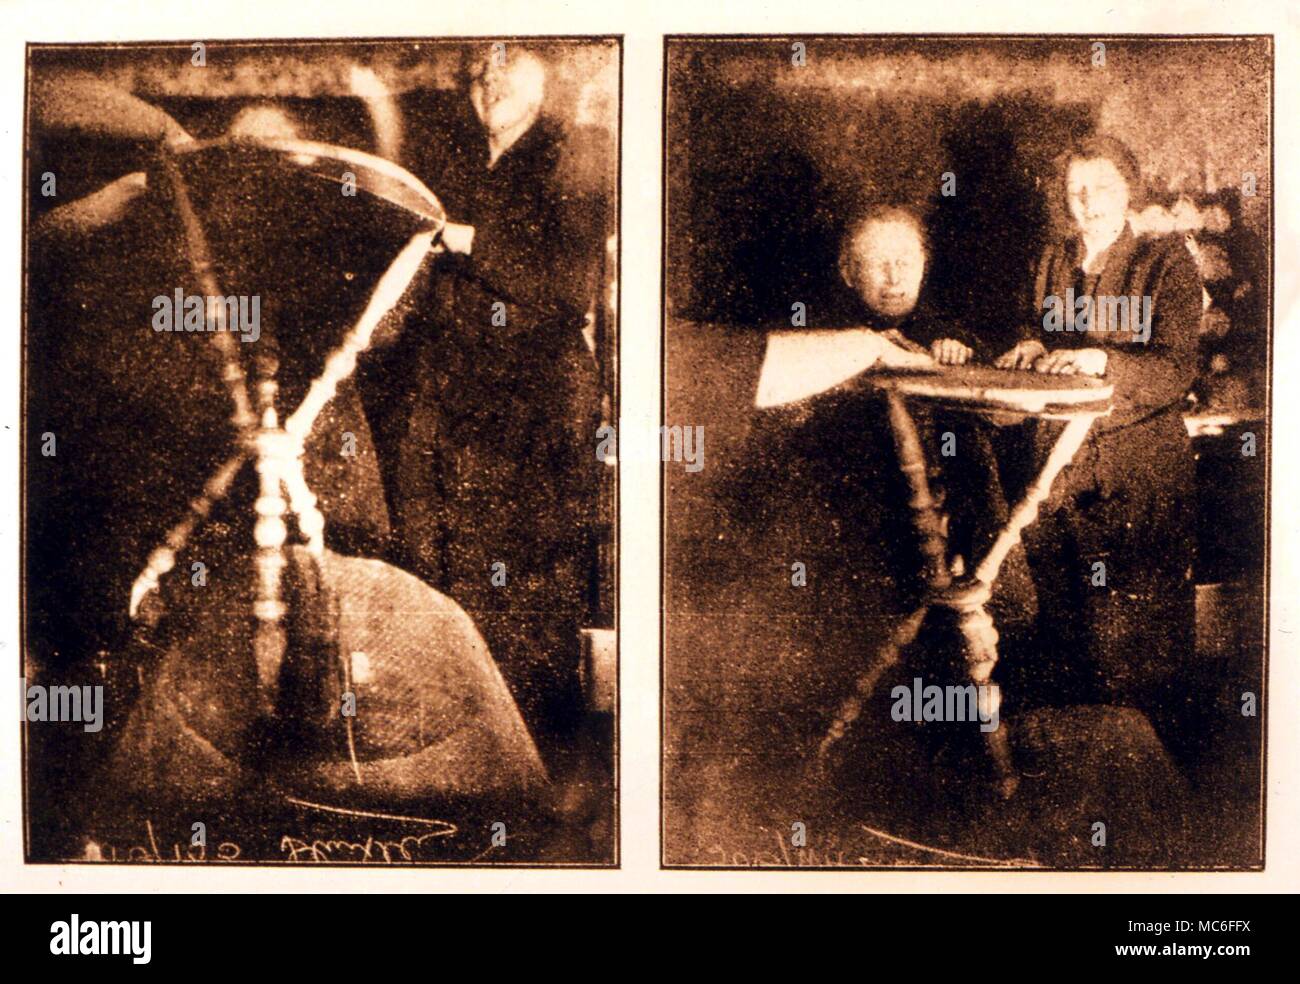 Levitation of a table. Two photographs taken simultaneoulsy by two cameras to show the levitation in a seance, held in October 1923 Stock Photo